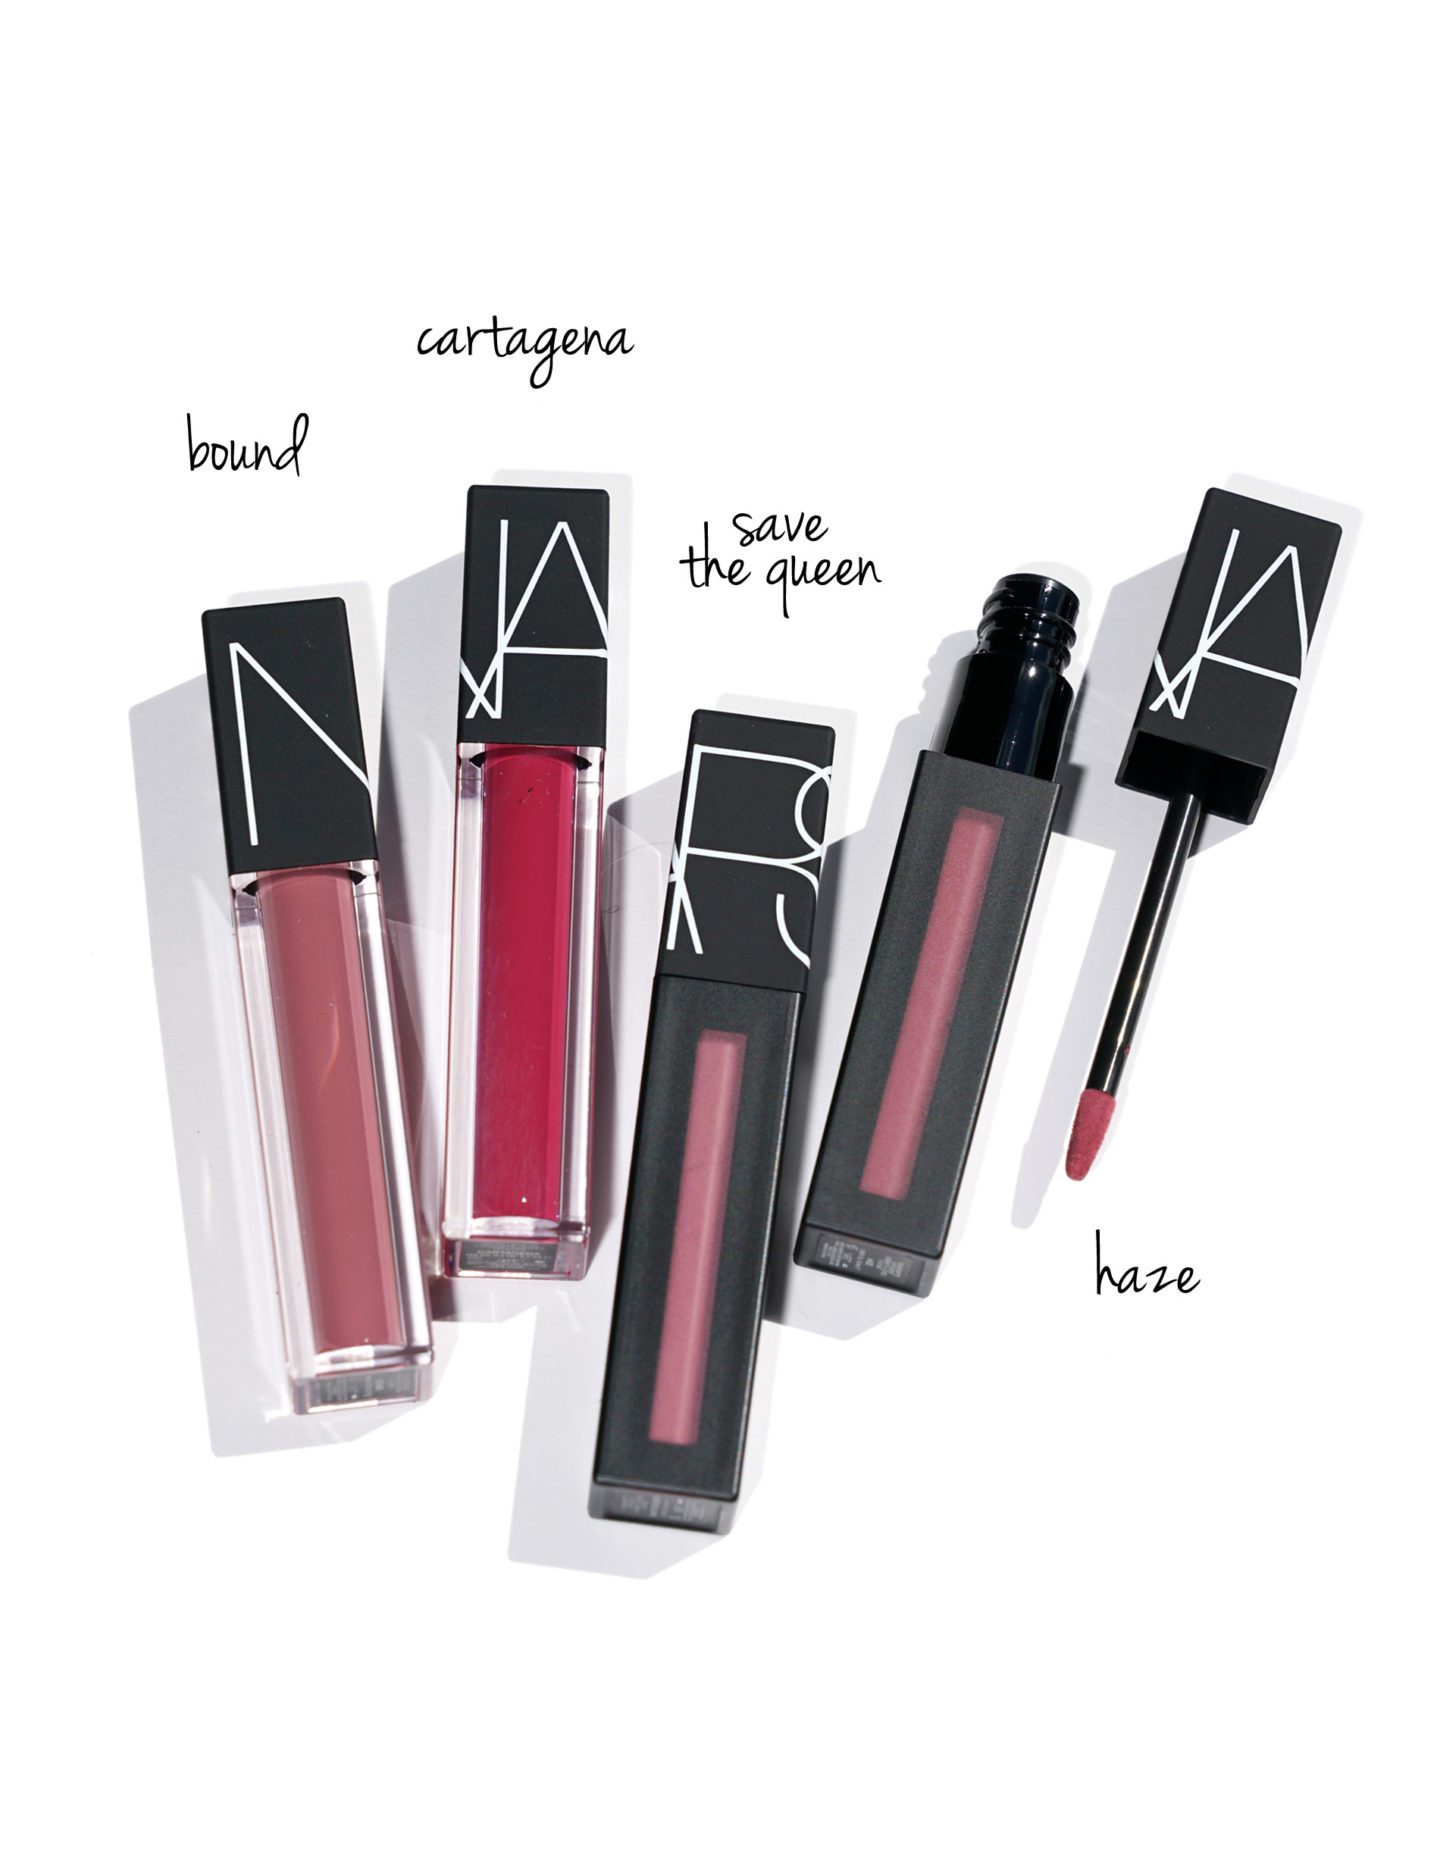 NARS Endless Summer Undressed Liquid Lip Set 2 swatches | The Beauty Look Book